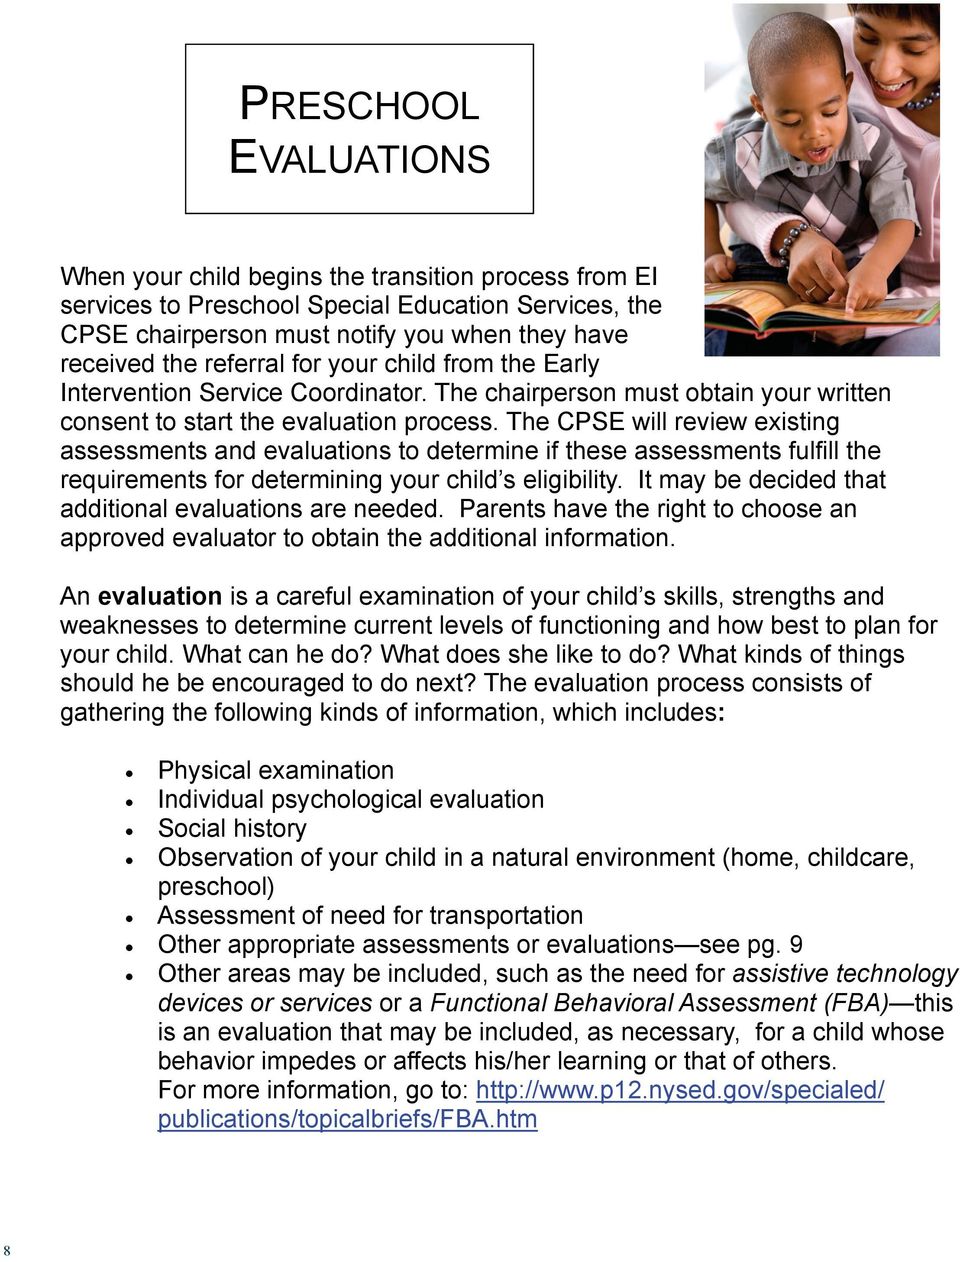 The CPSE will review existing assessments and evaluations to determine if these assessments fulfill the requirements for determining your child s eligibility.